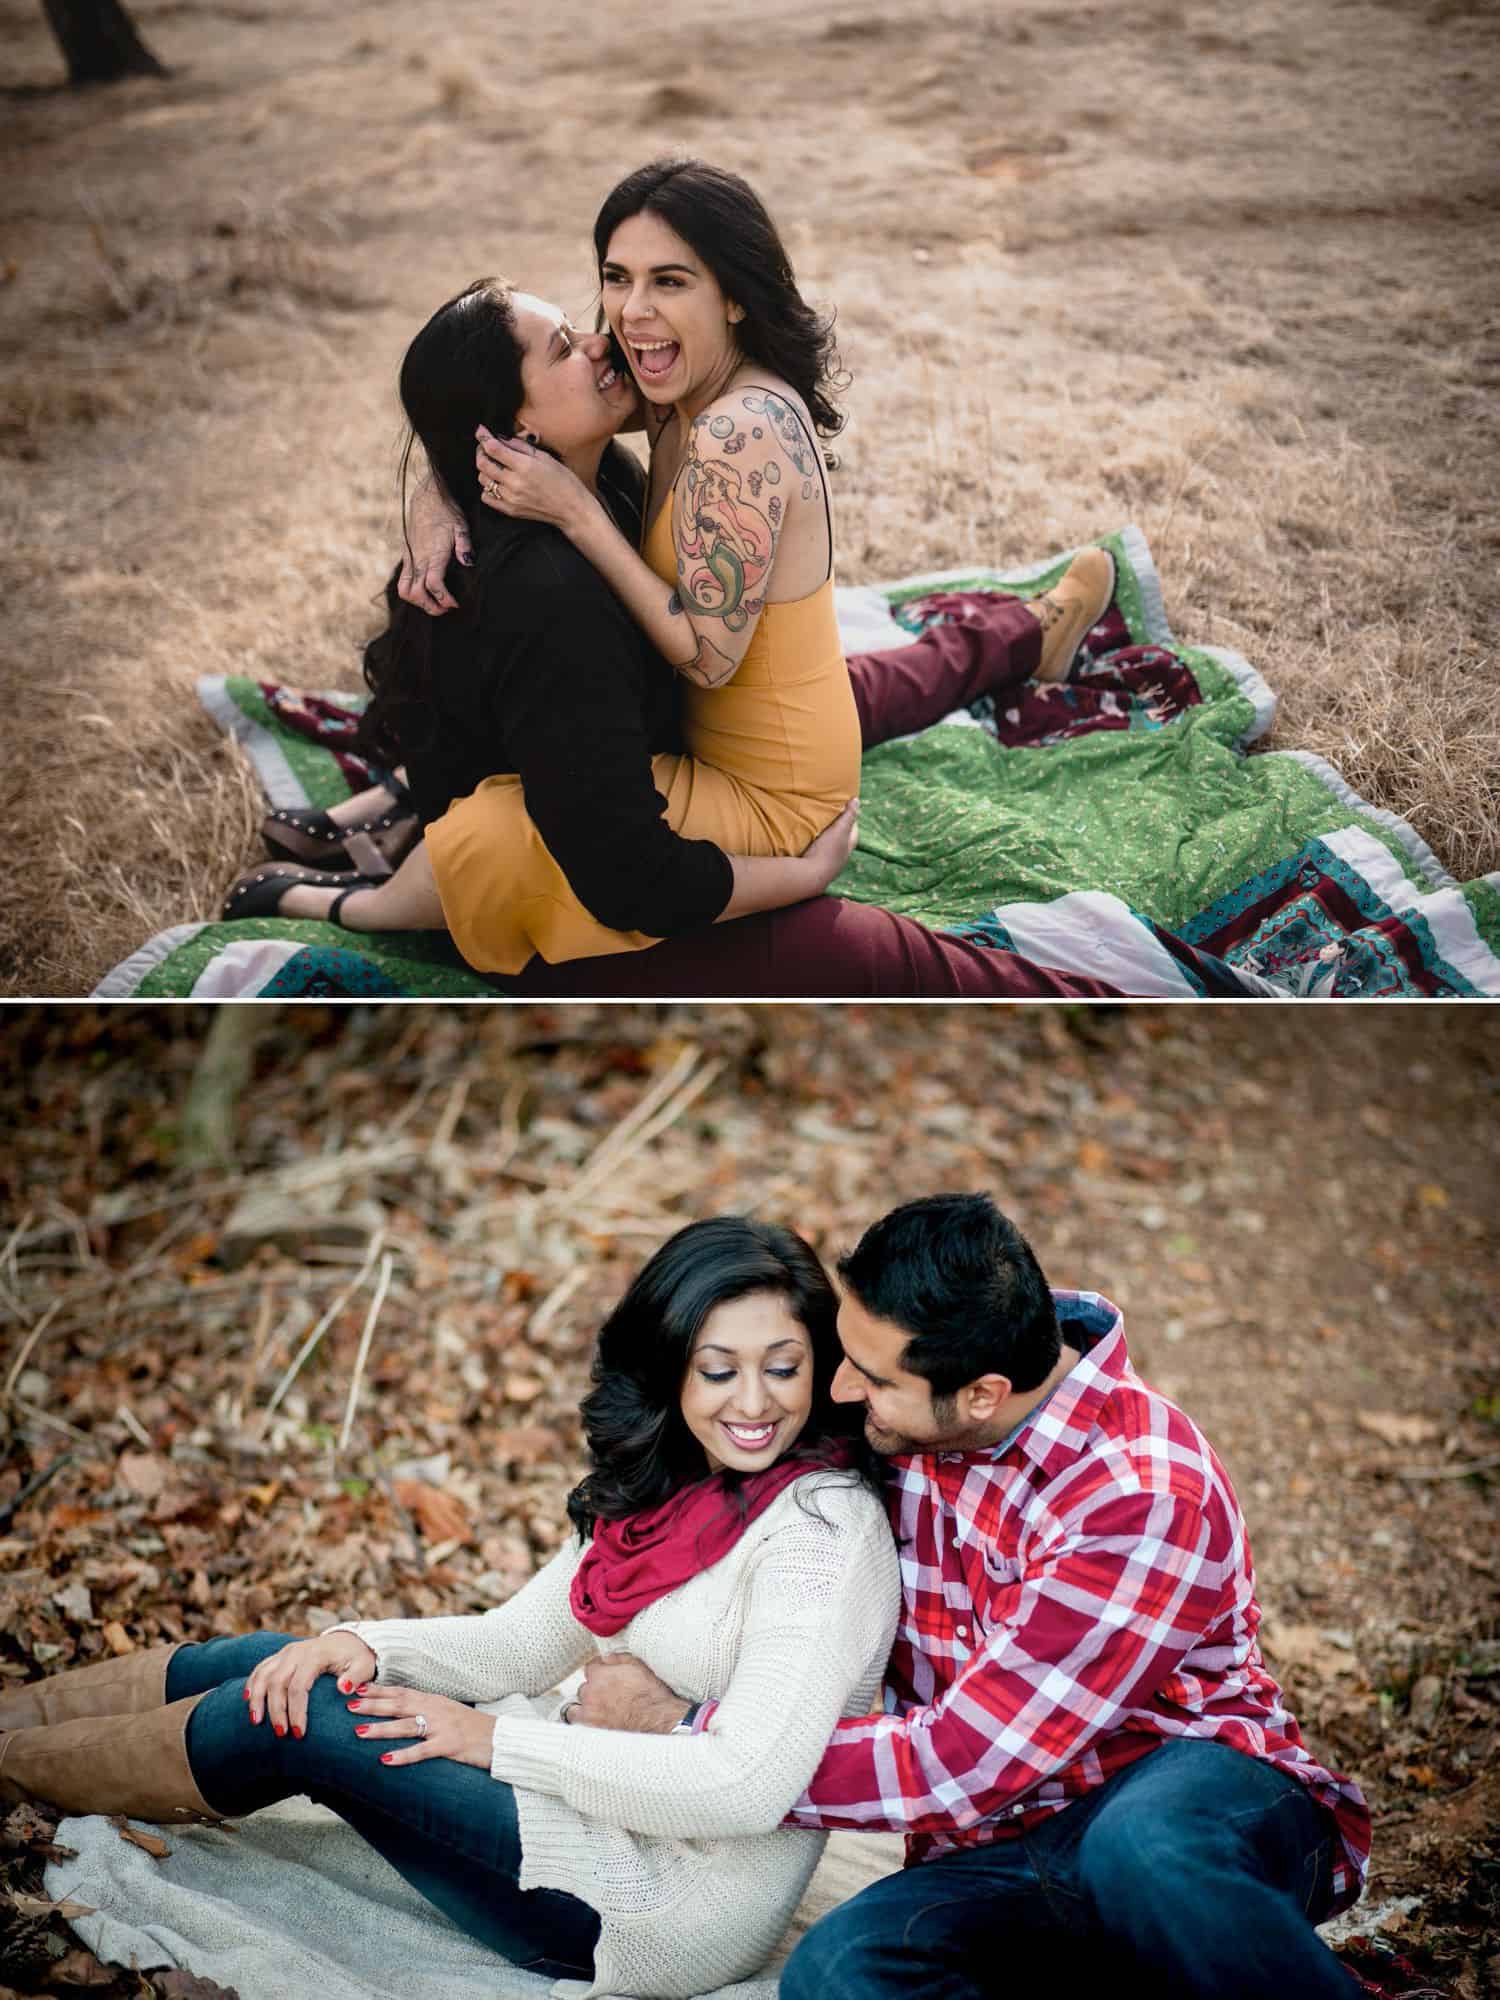 Couples snuggle on picnic blankets for their engagement photos